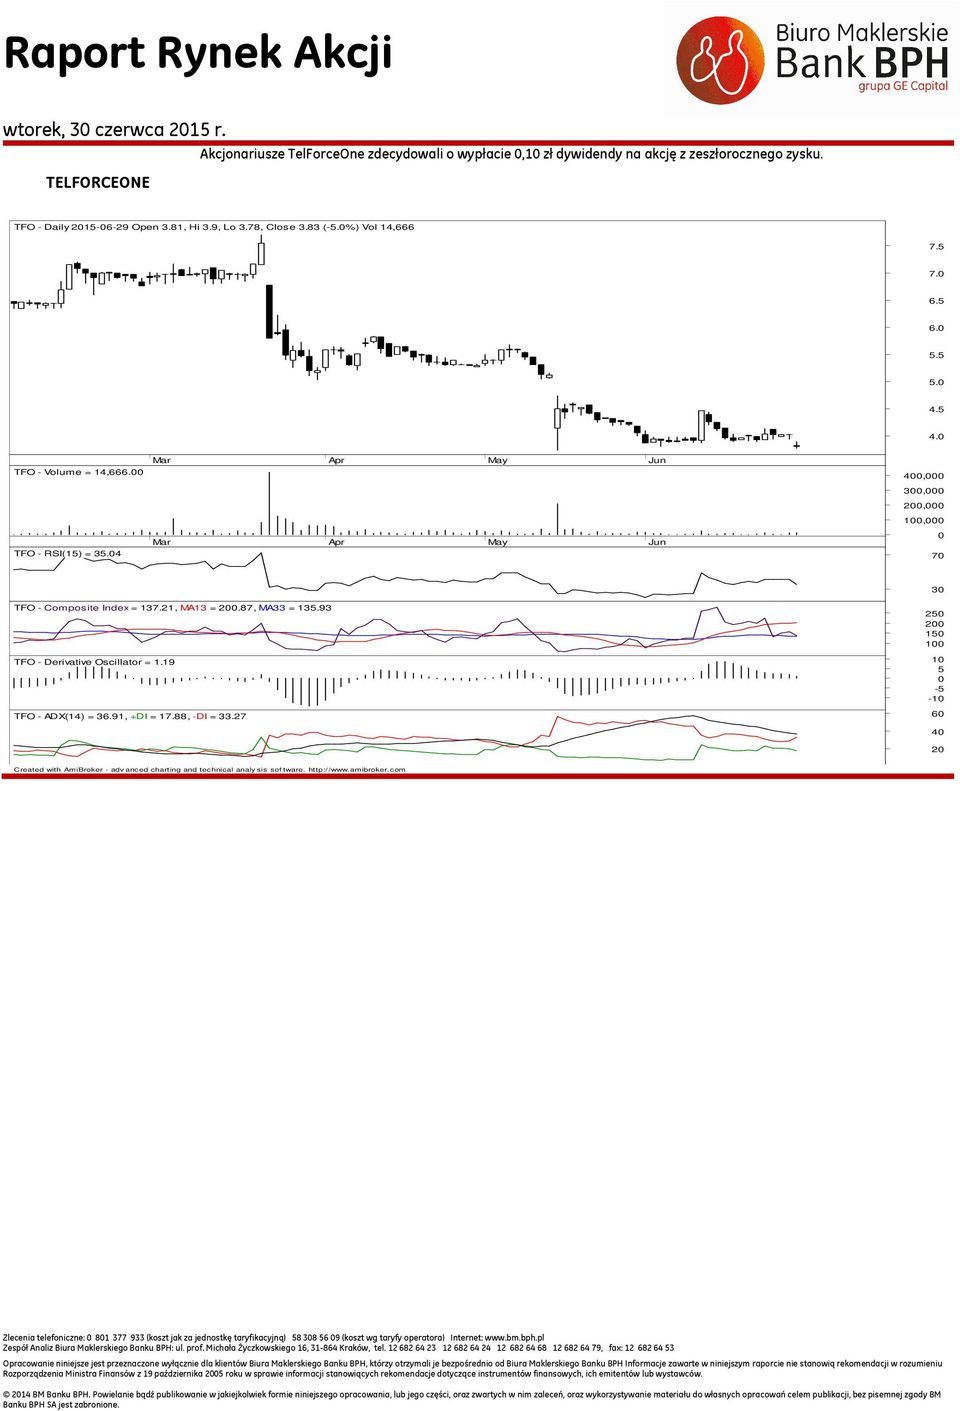 19 TFO - ADX(14) = 36.91, +DI = 17.88, -DI = 33.27 2 2 1 1 1 - -1 6 4 2 Created with AmiBroker - advanced charting and technical analy sis sof tware. http://www.amibroker.